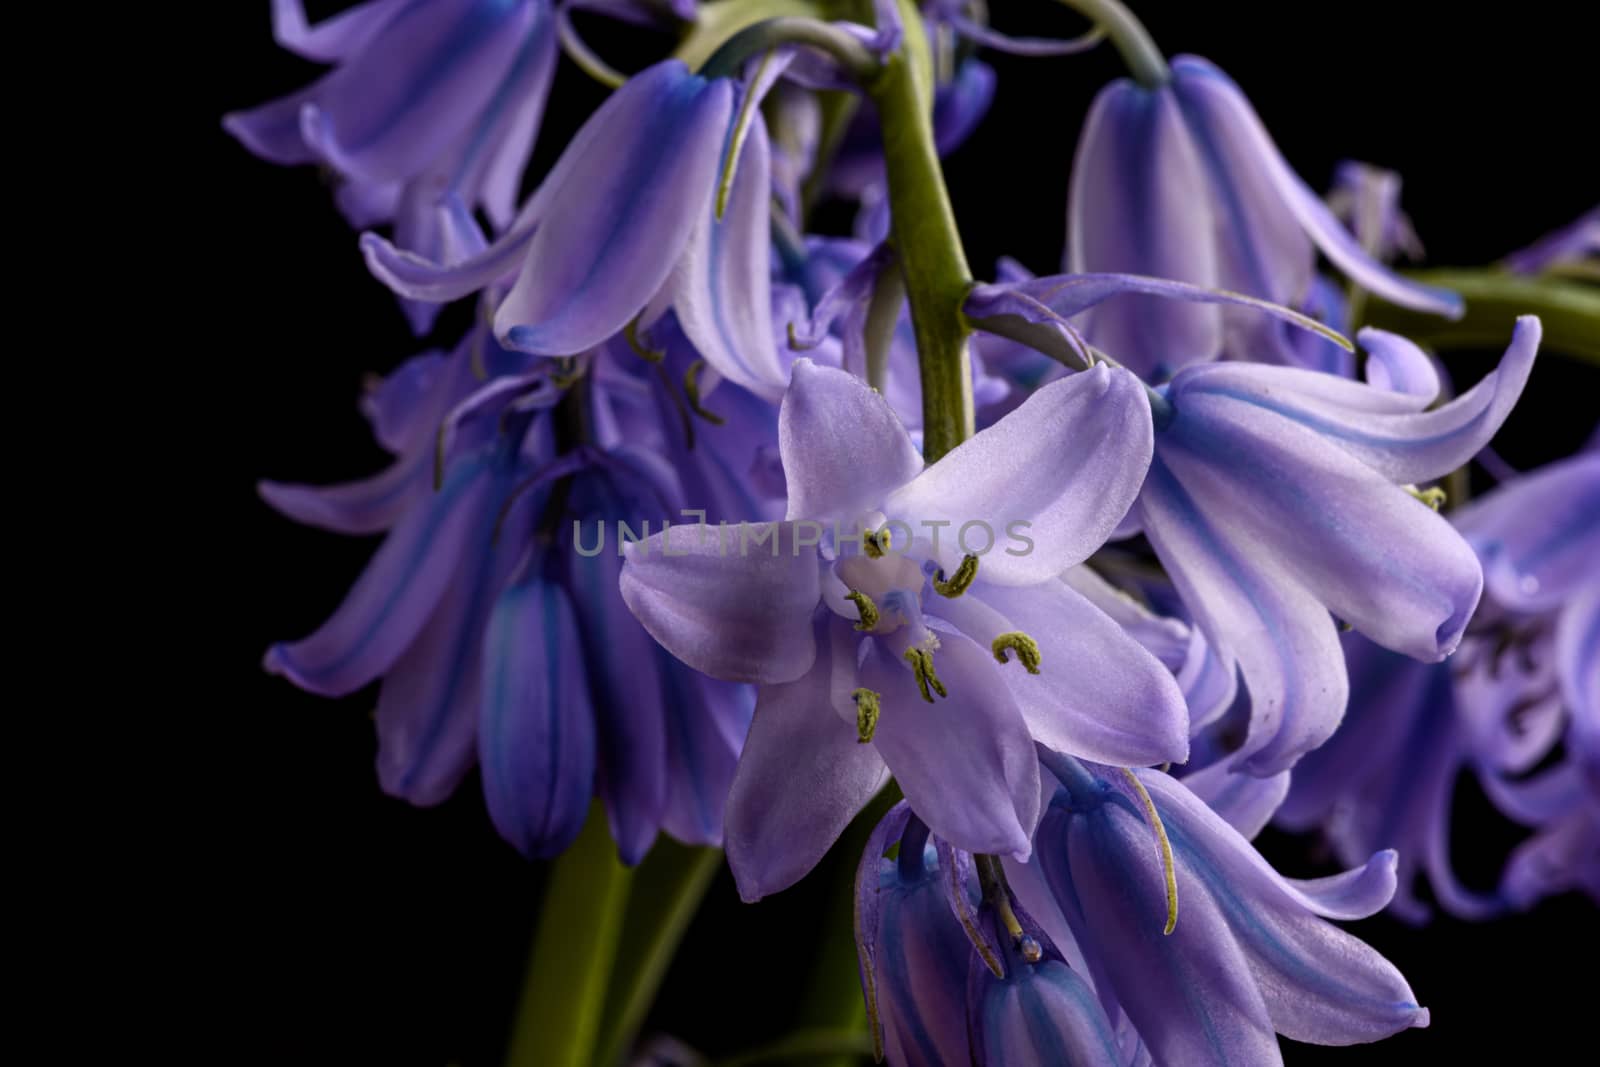 Bluebell flowers isolated on a black background